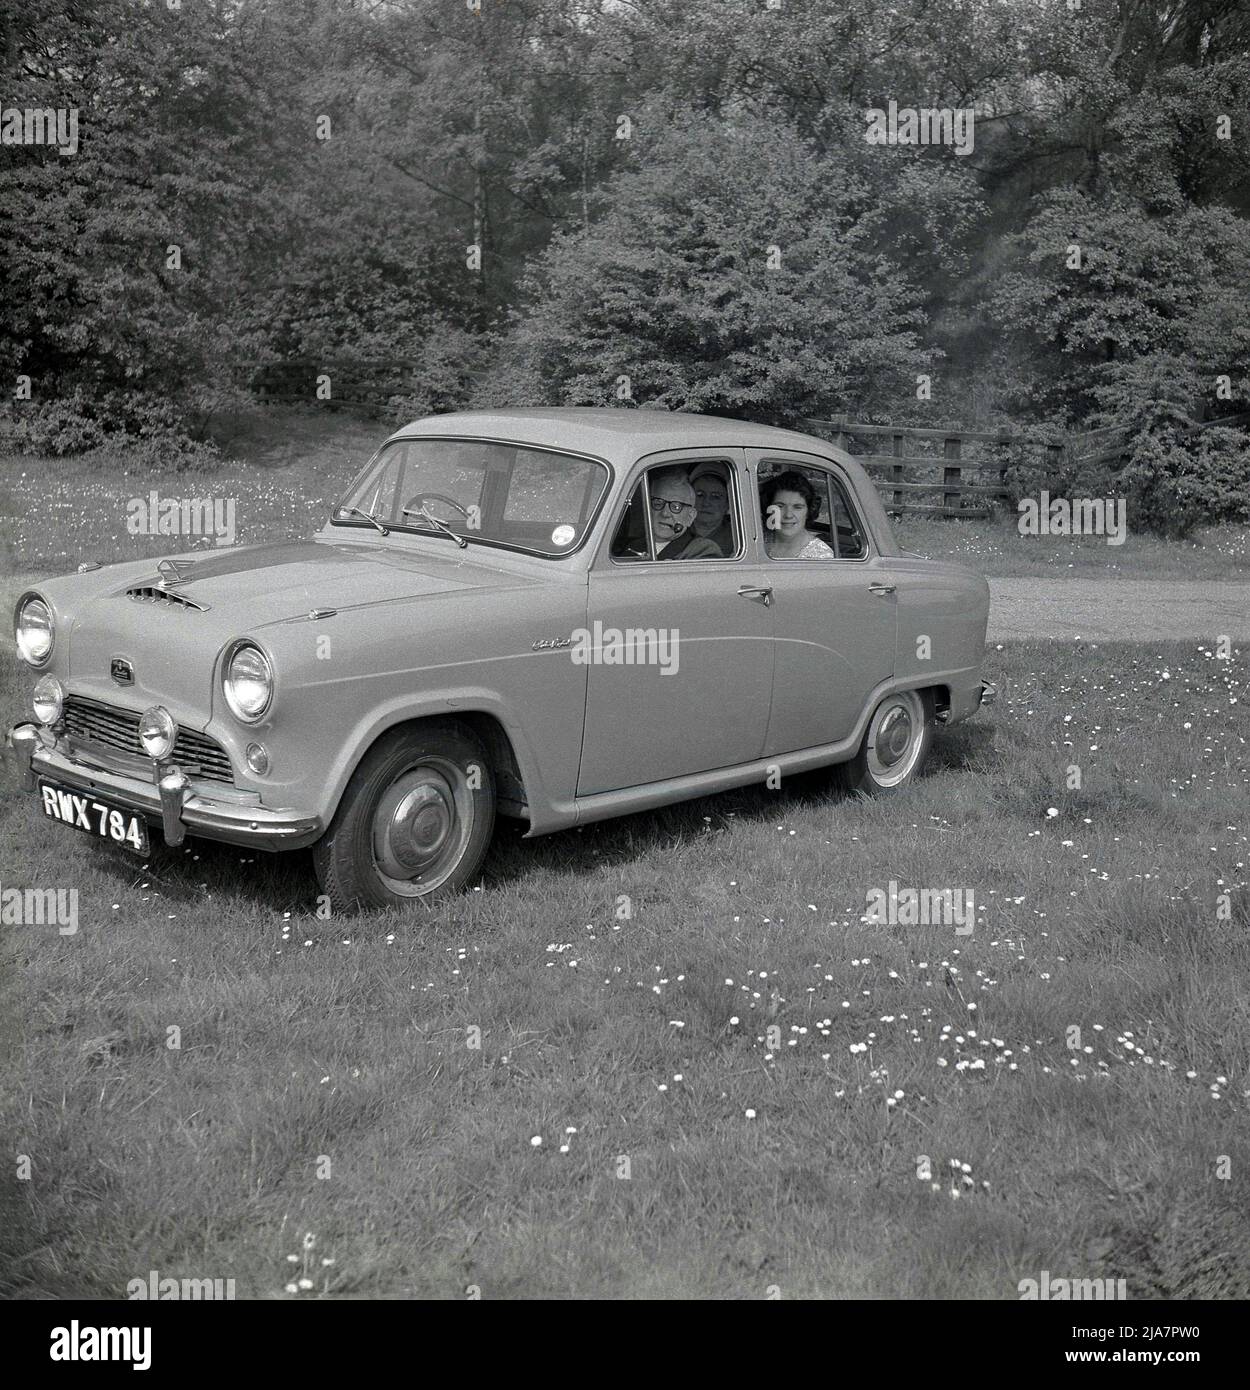 1950s, historical, post-war Britain and parked in a field at a park, a man and two ladies sitting in an Austin A40 Cambridge car of the era. The gentleman is smoking a pipe, while the two ladies sit in the back of the 4-door small family car.  In this era, going out for a day's drive to a scenic location was a popular leisure activity and is considered to be the golden age of motoring. Made by the British manufacturer, the Austin Motor Company, the Austin Cambridge motorcar was in production - with several different versions and body shapes - from 1954 to 1971. Stock Photo